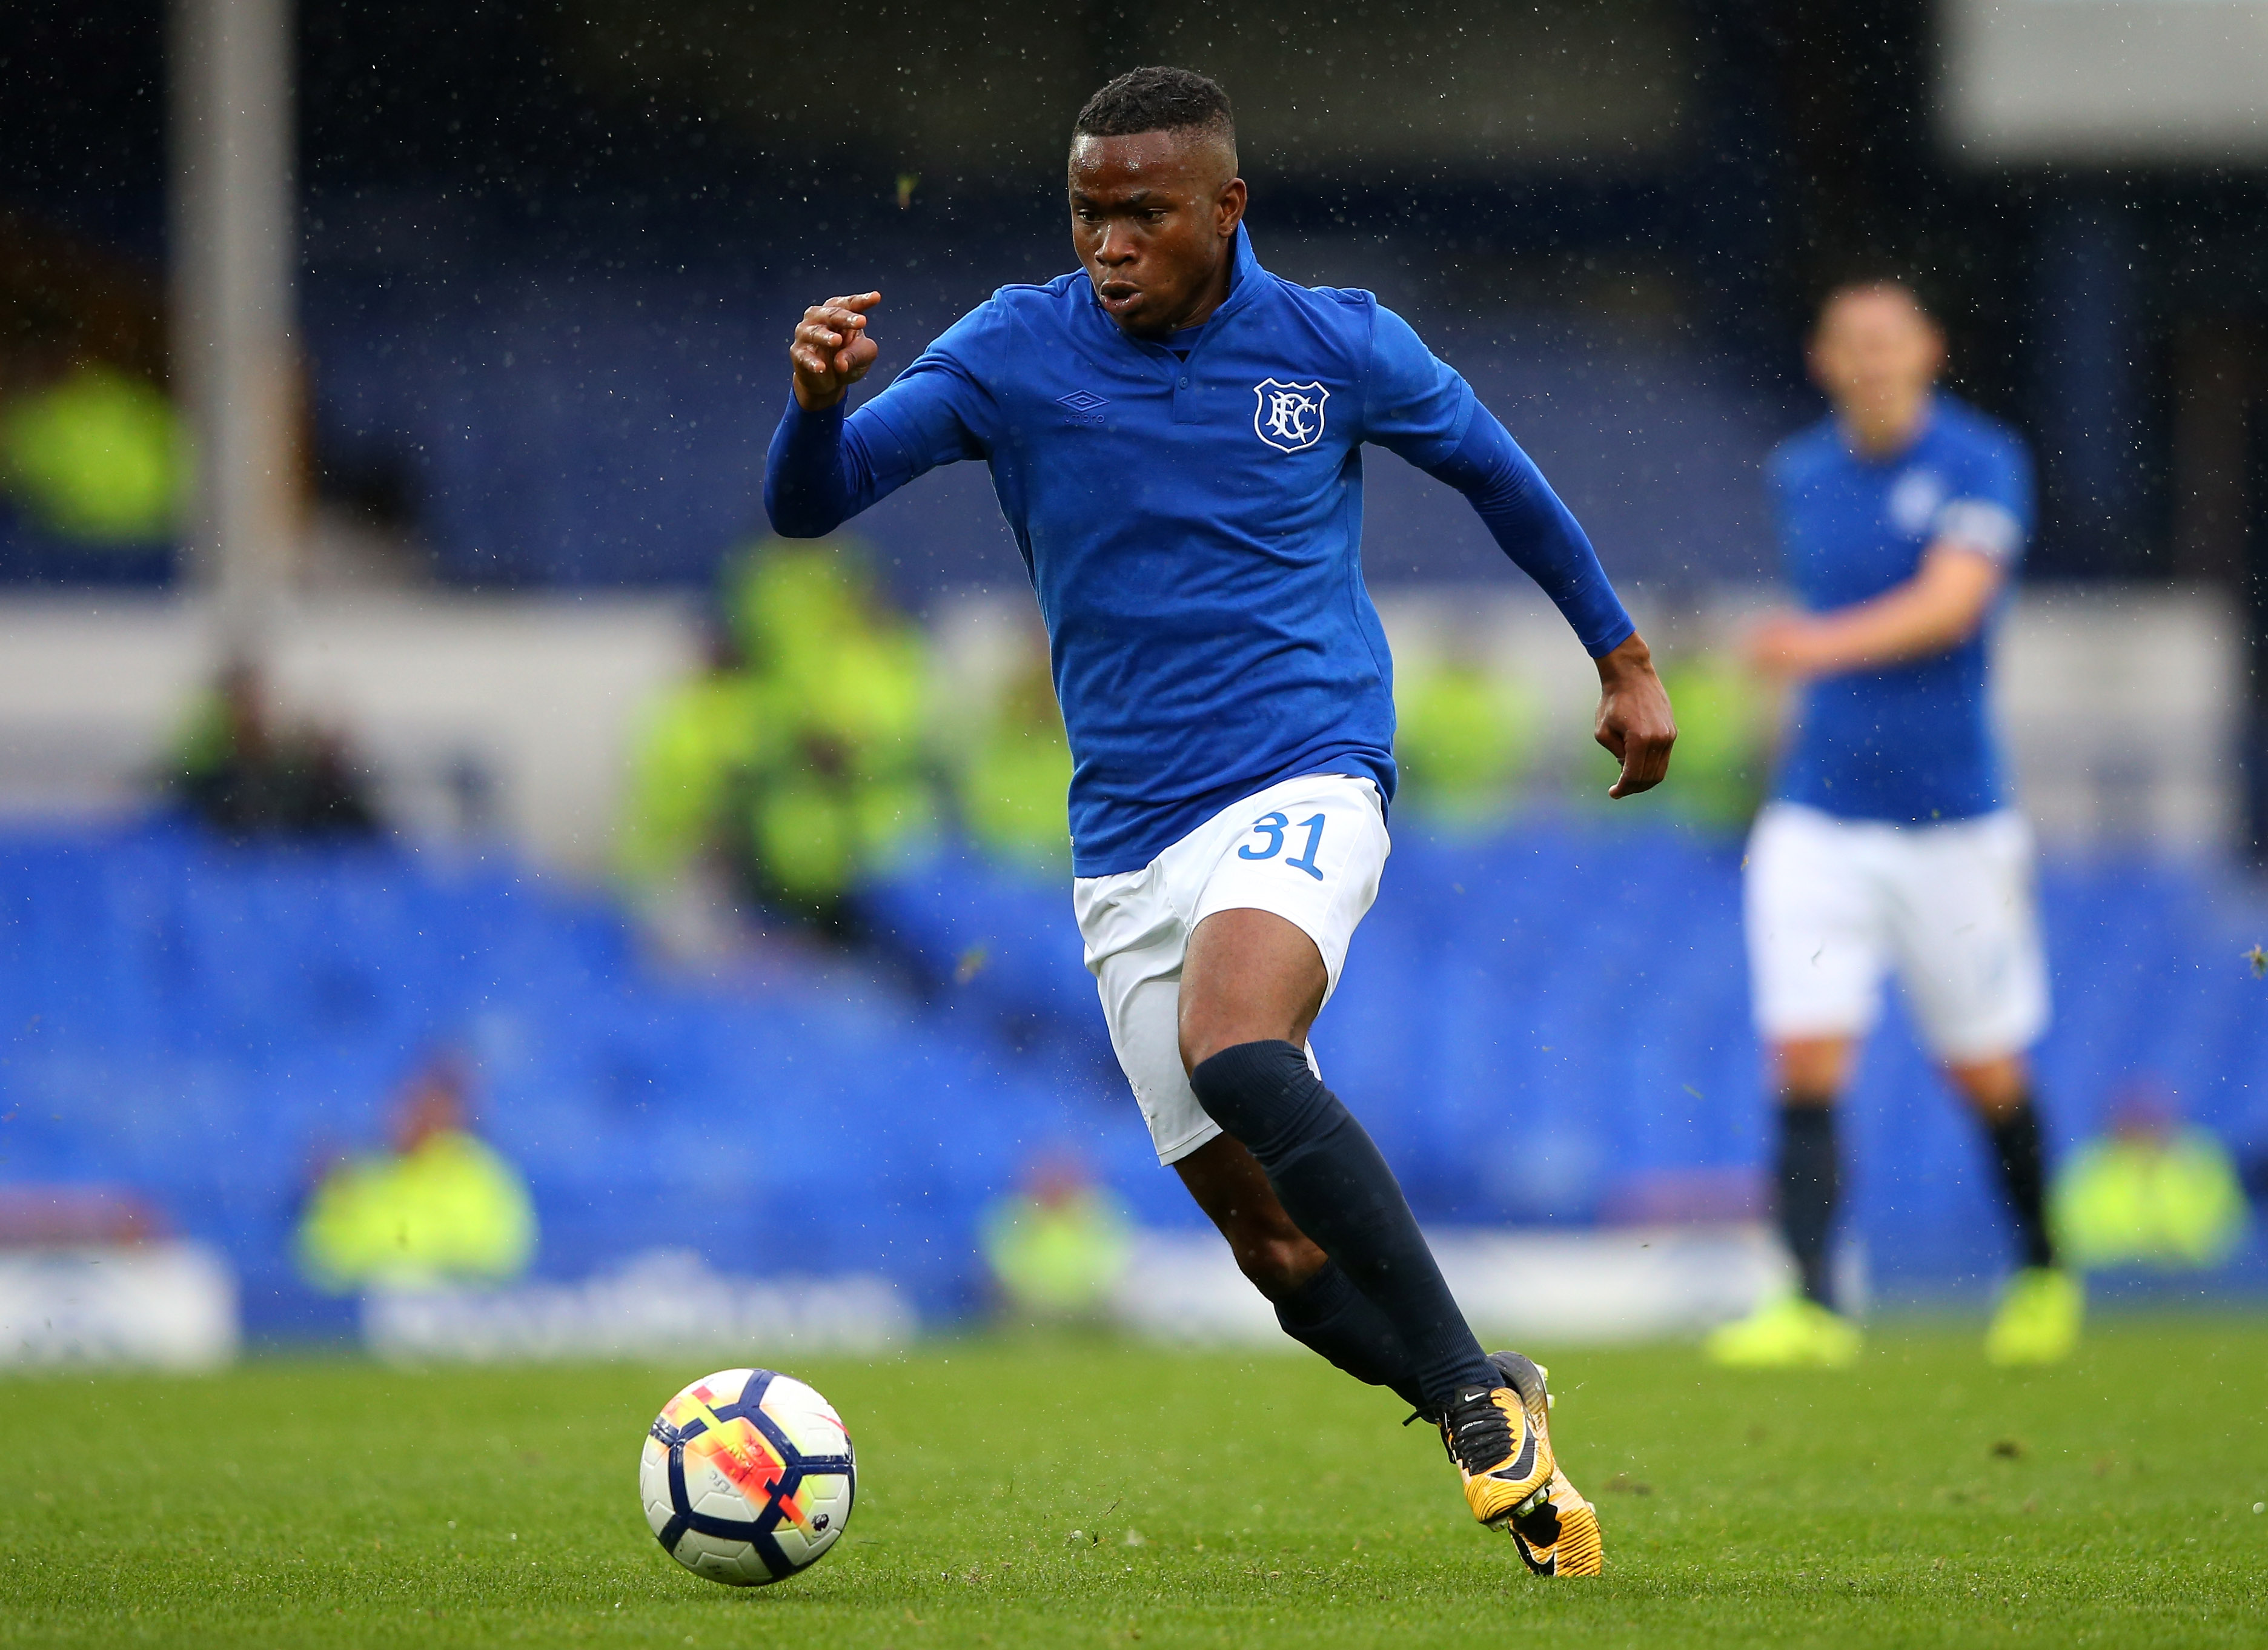 LIVERPOOL, ENGLAND - AUGUST 06:  Ademola Lookman of Everton during a pre-season friendly match between Everton and Sevilla at Goodison Park on August 6, 2017 in Liverpool, England.  (Photo by Alex Livesey/Getty Images)